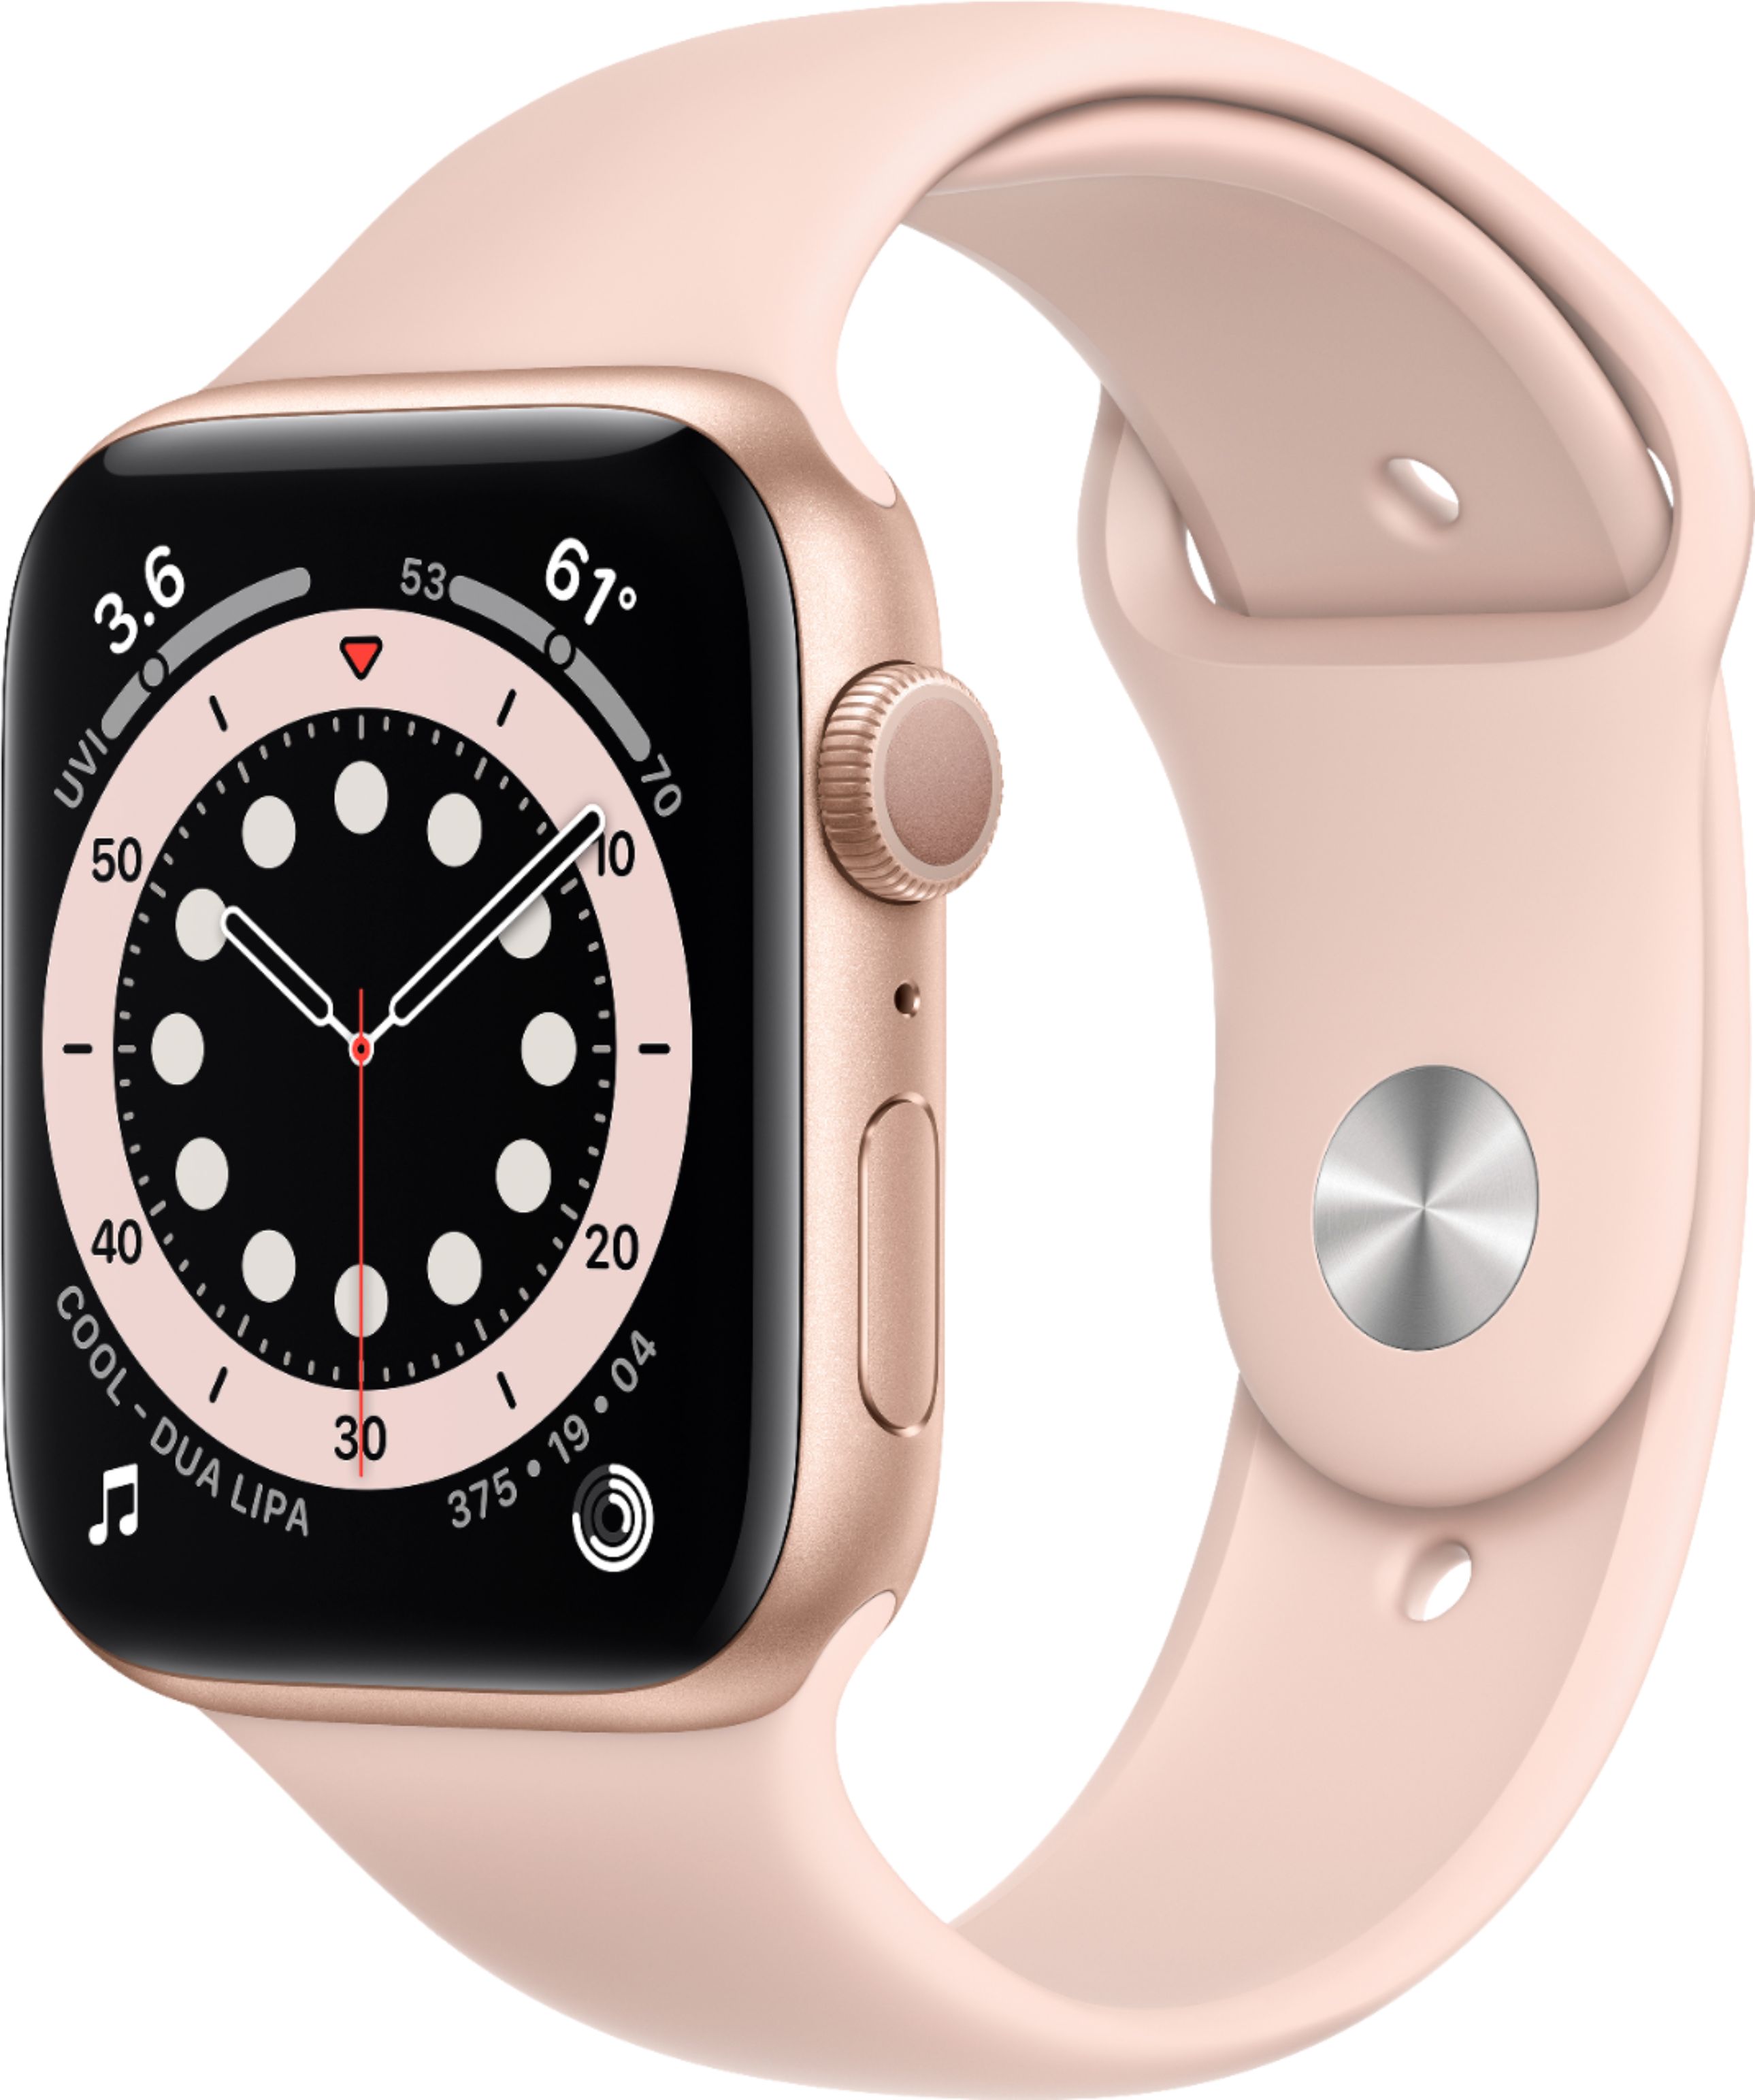 How much does it cost to make an apple watch Apple Watch Series 6 Gps 44mm Gold Aluminum Case With Pink Sand Sport Band Gold M00e3ll A Best Buy